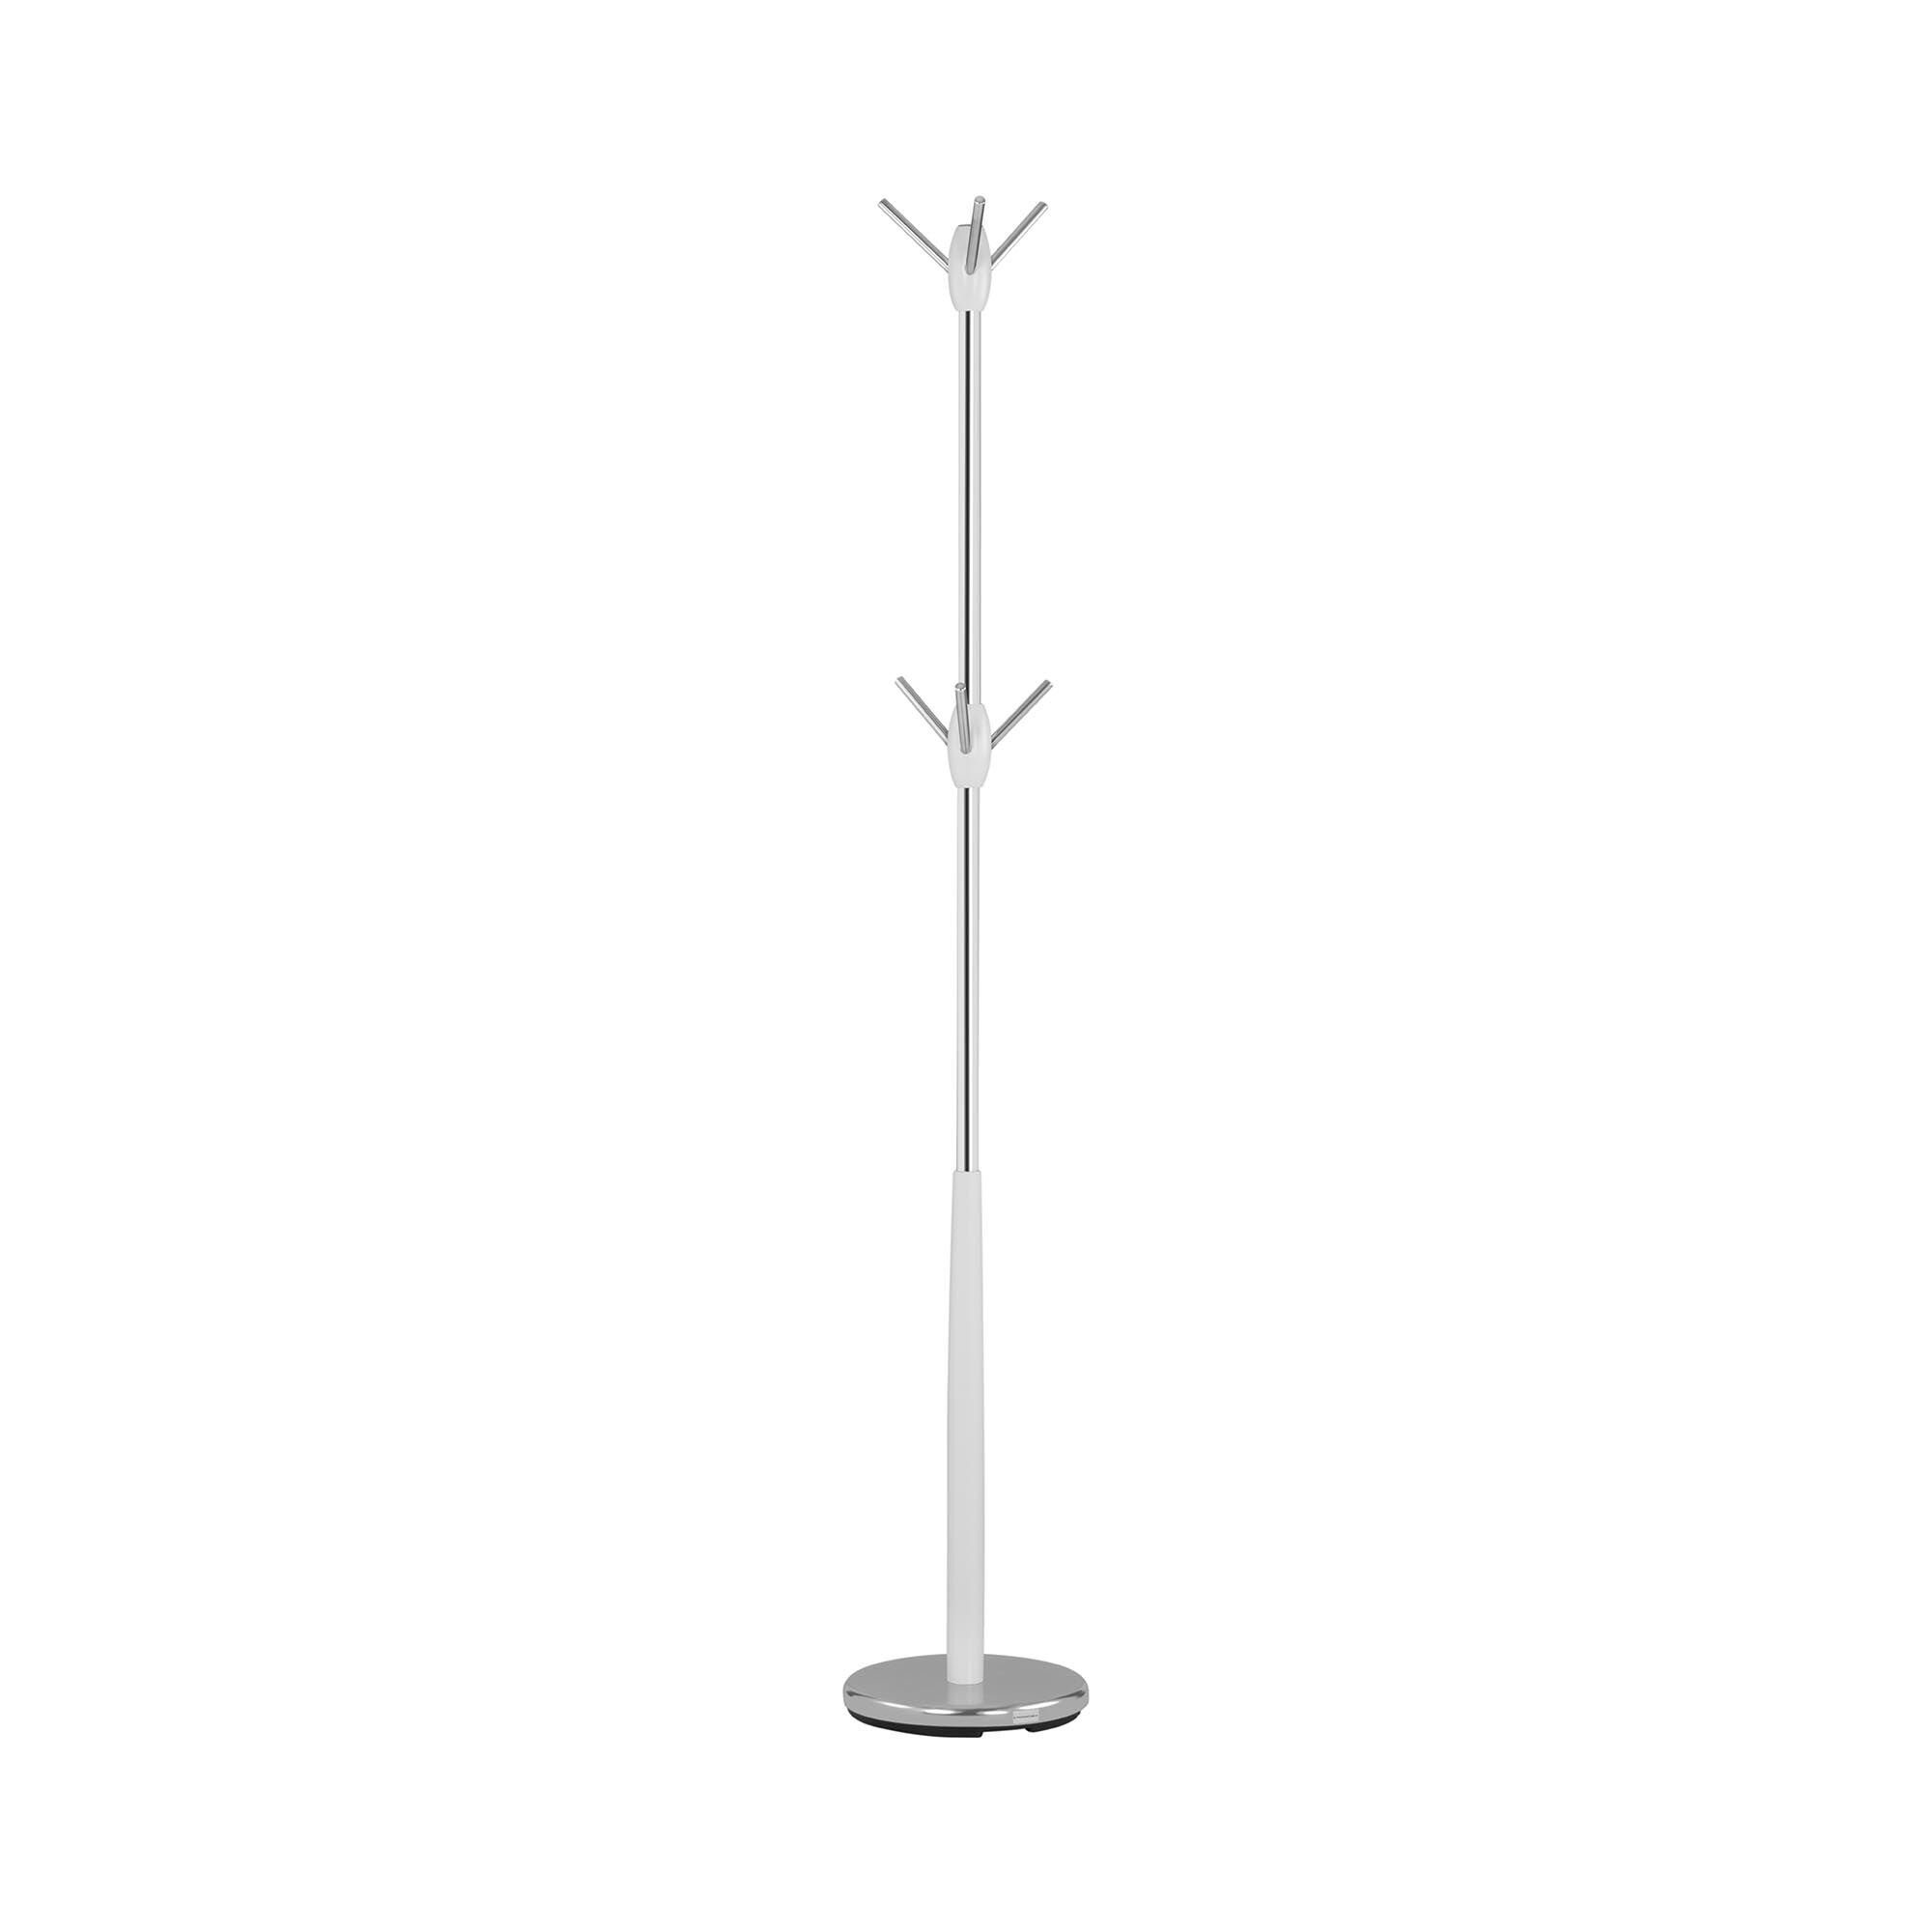 Fromm & Starck Coat Stand - 6 pegs - chrome-plated - round base